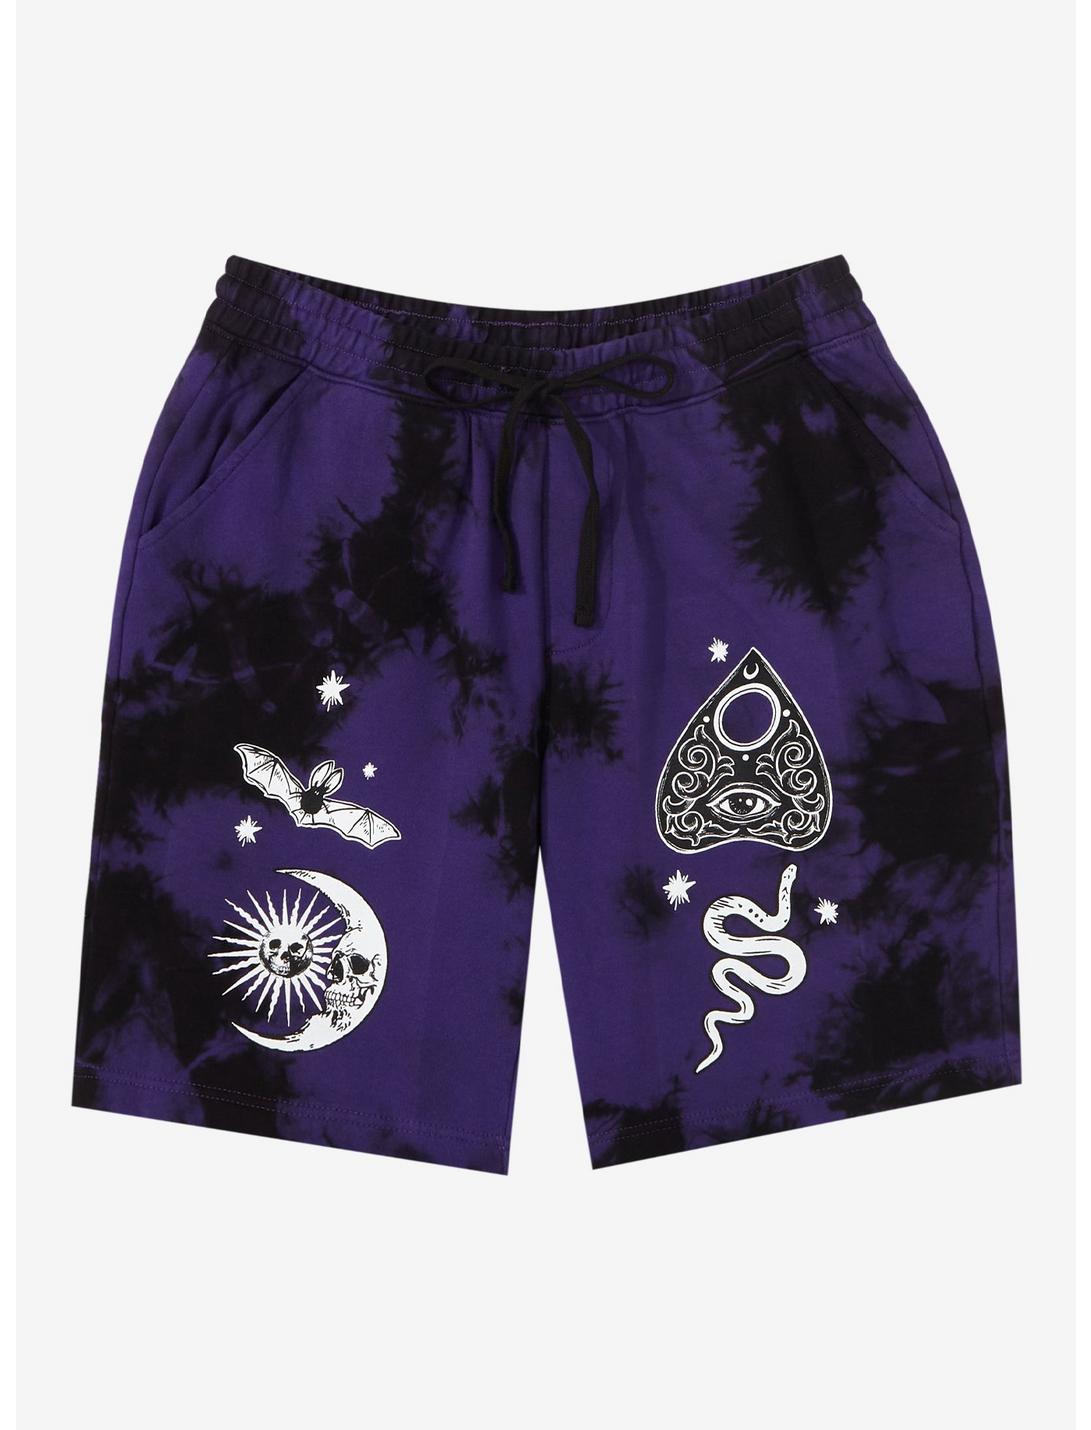 Occult Symbols Tie-Dye Lounge Shorts | Hot Topic